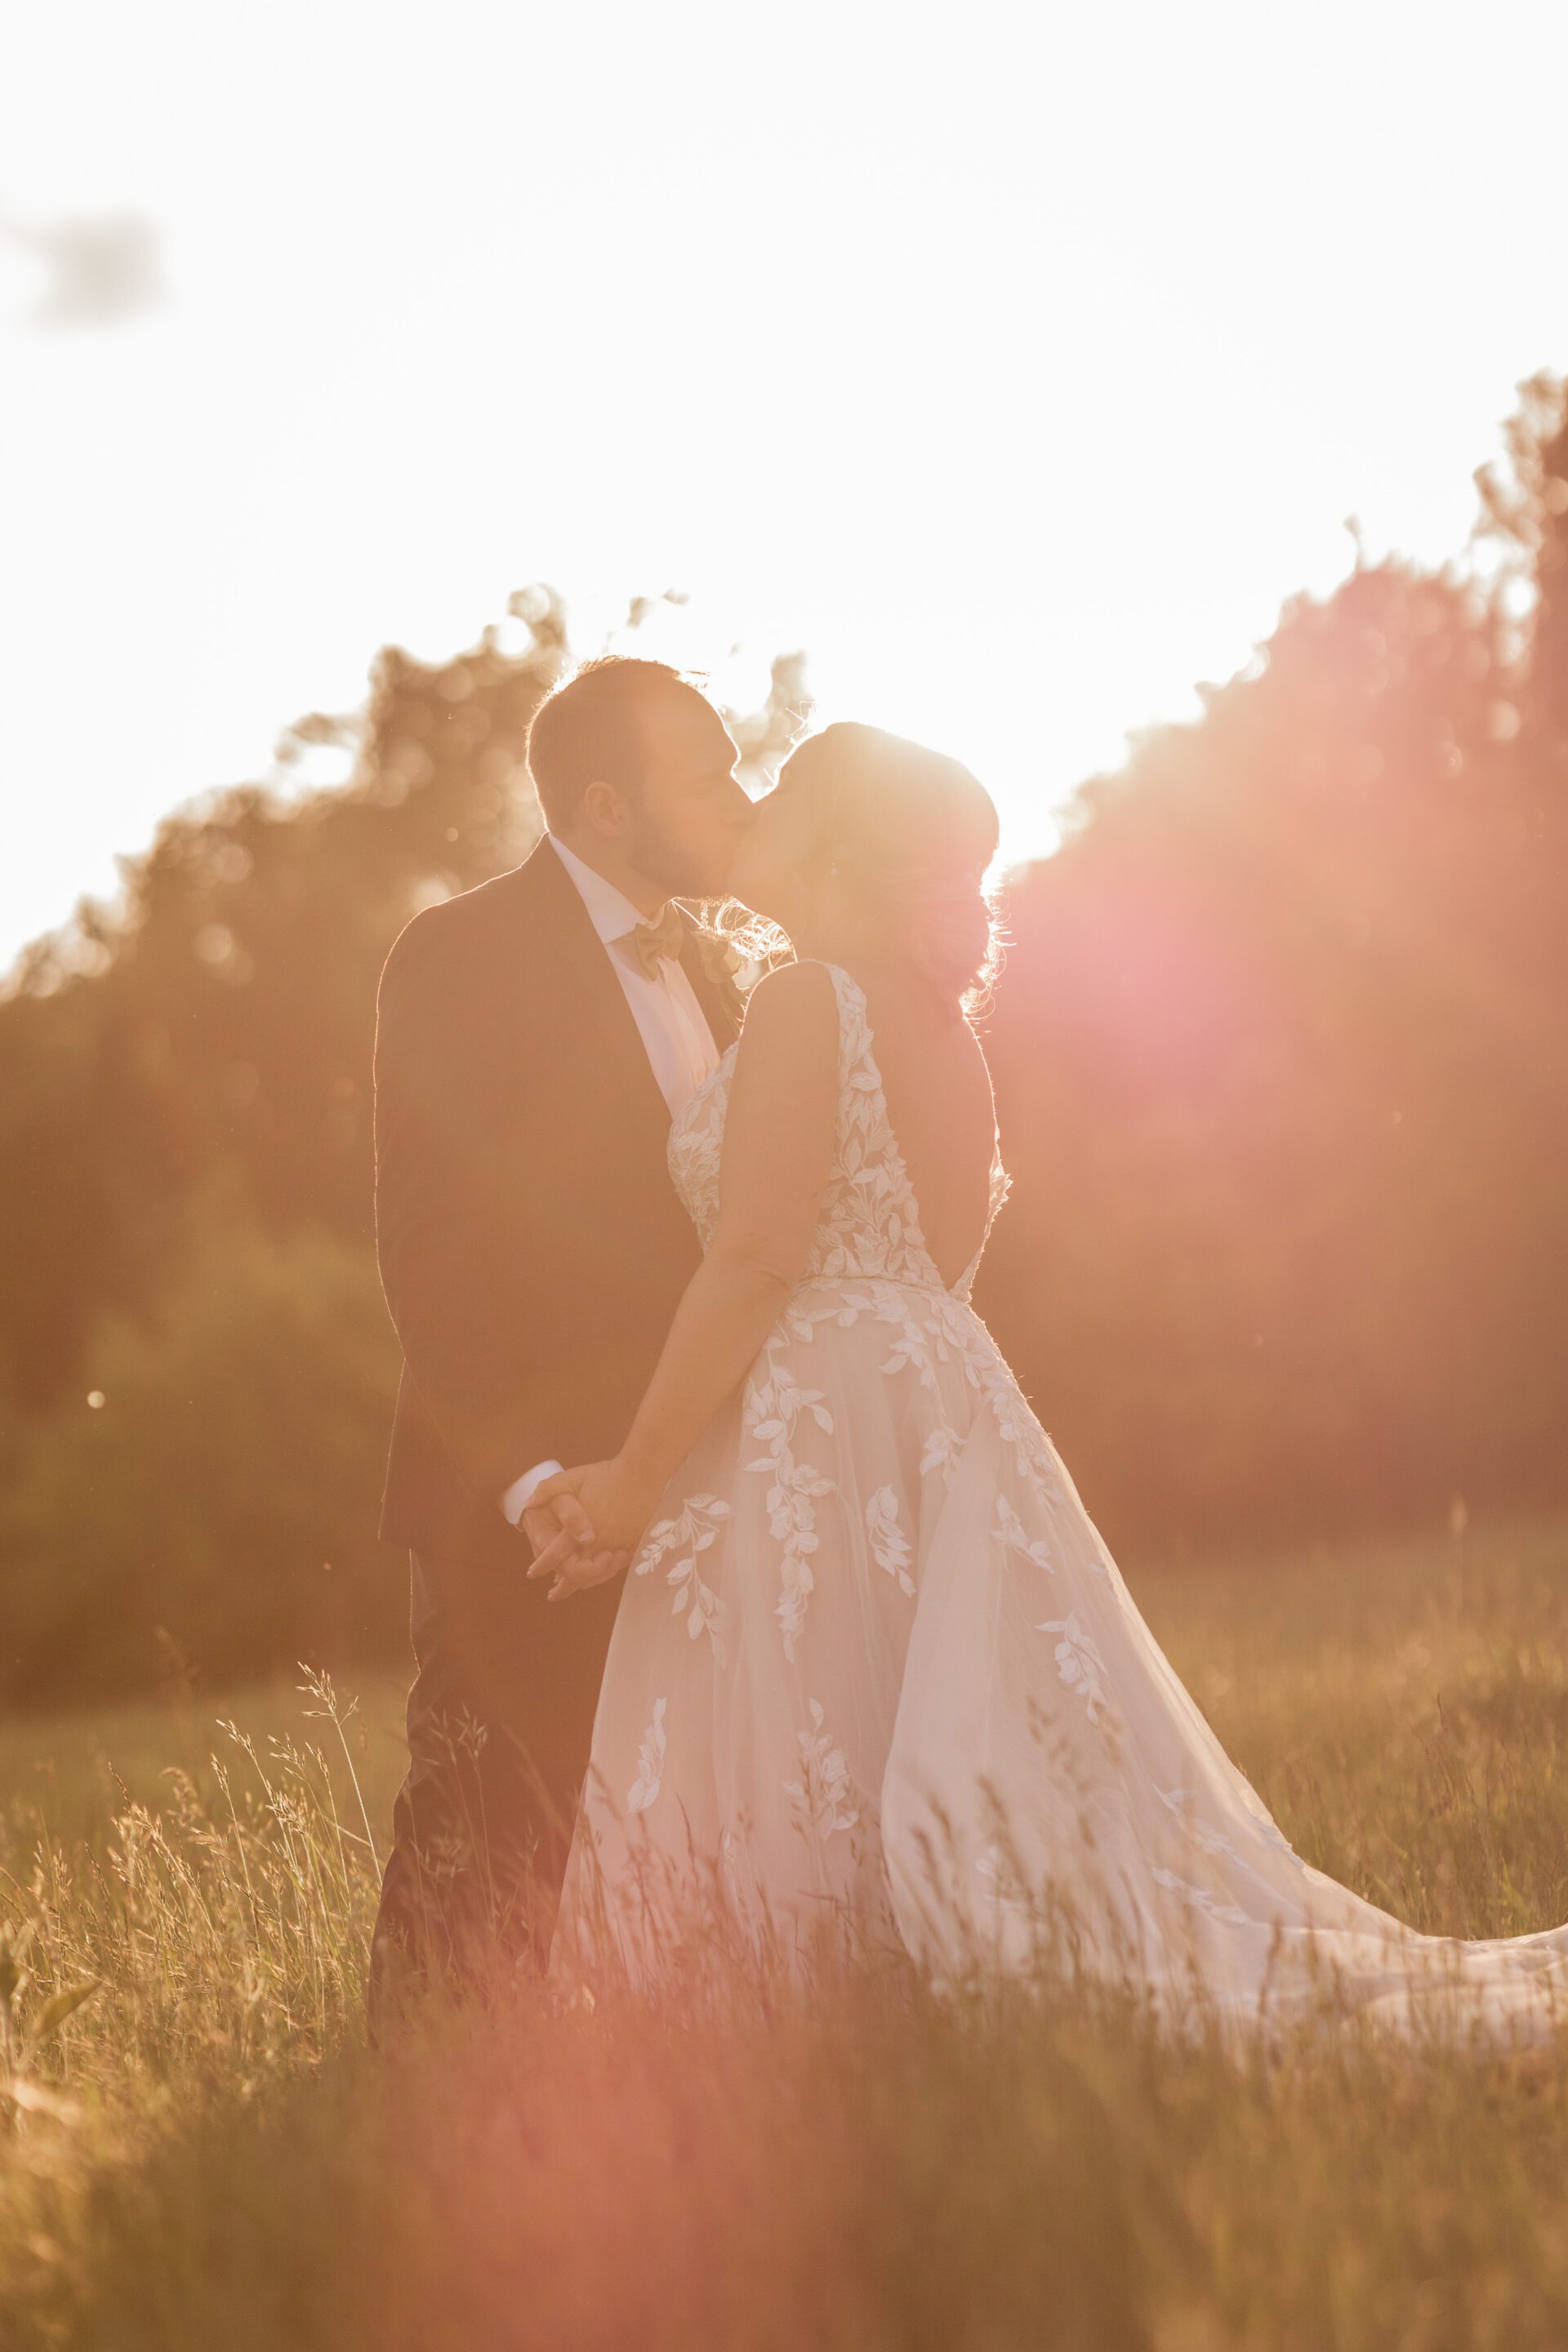 The bride and groom share a kiss in gorgeous golden hour light